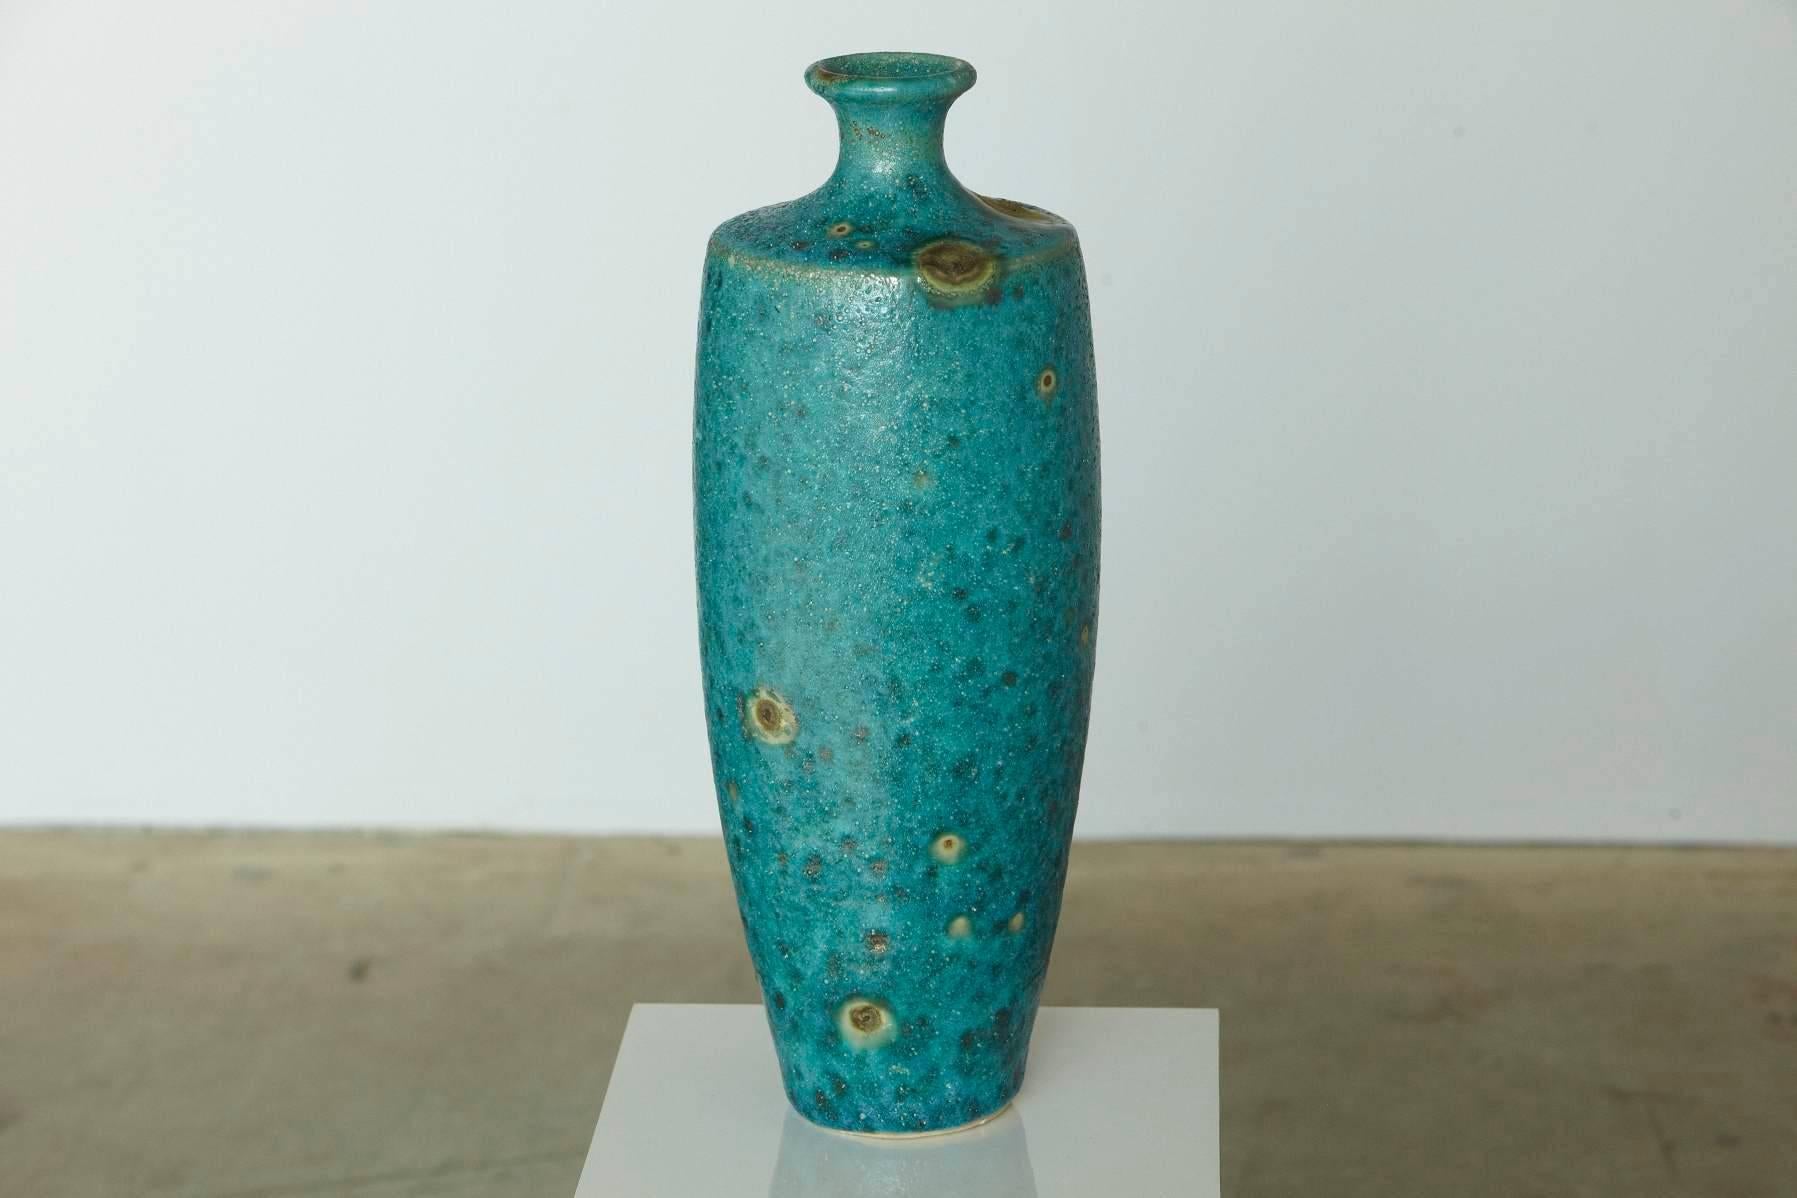 Beautiful large Italian modern ceramic fat lava glaze vase in turquoise blue with golden sunbursts in the style of Guido Gambone.
Very good, almost excellent condition, no chips, flea bites, cracks or repairs.